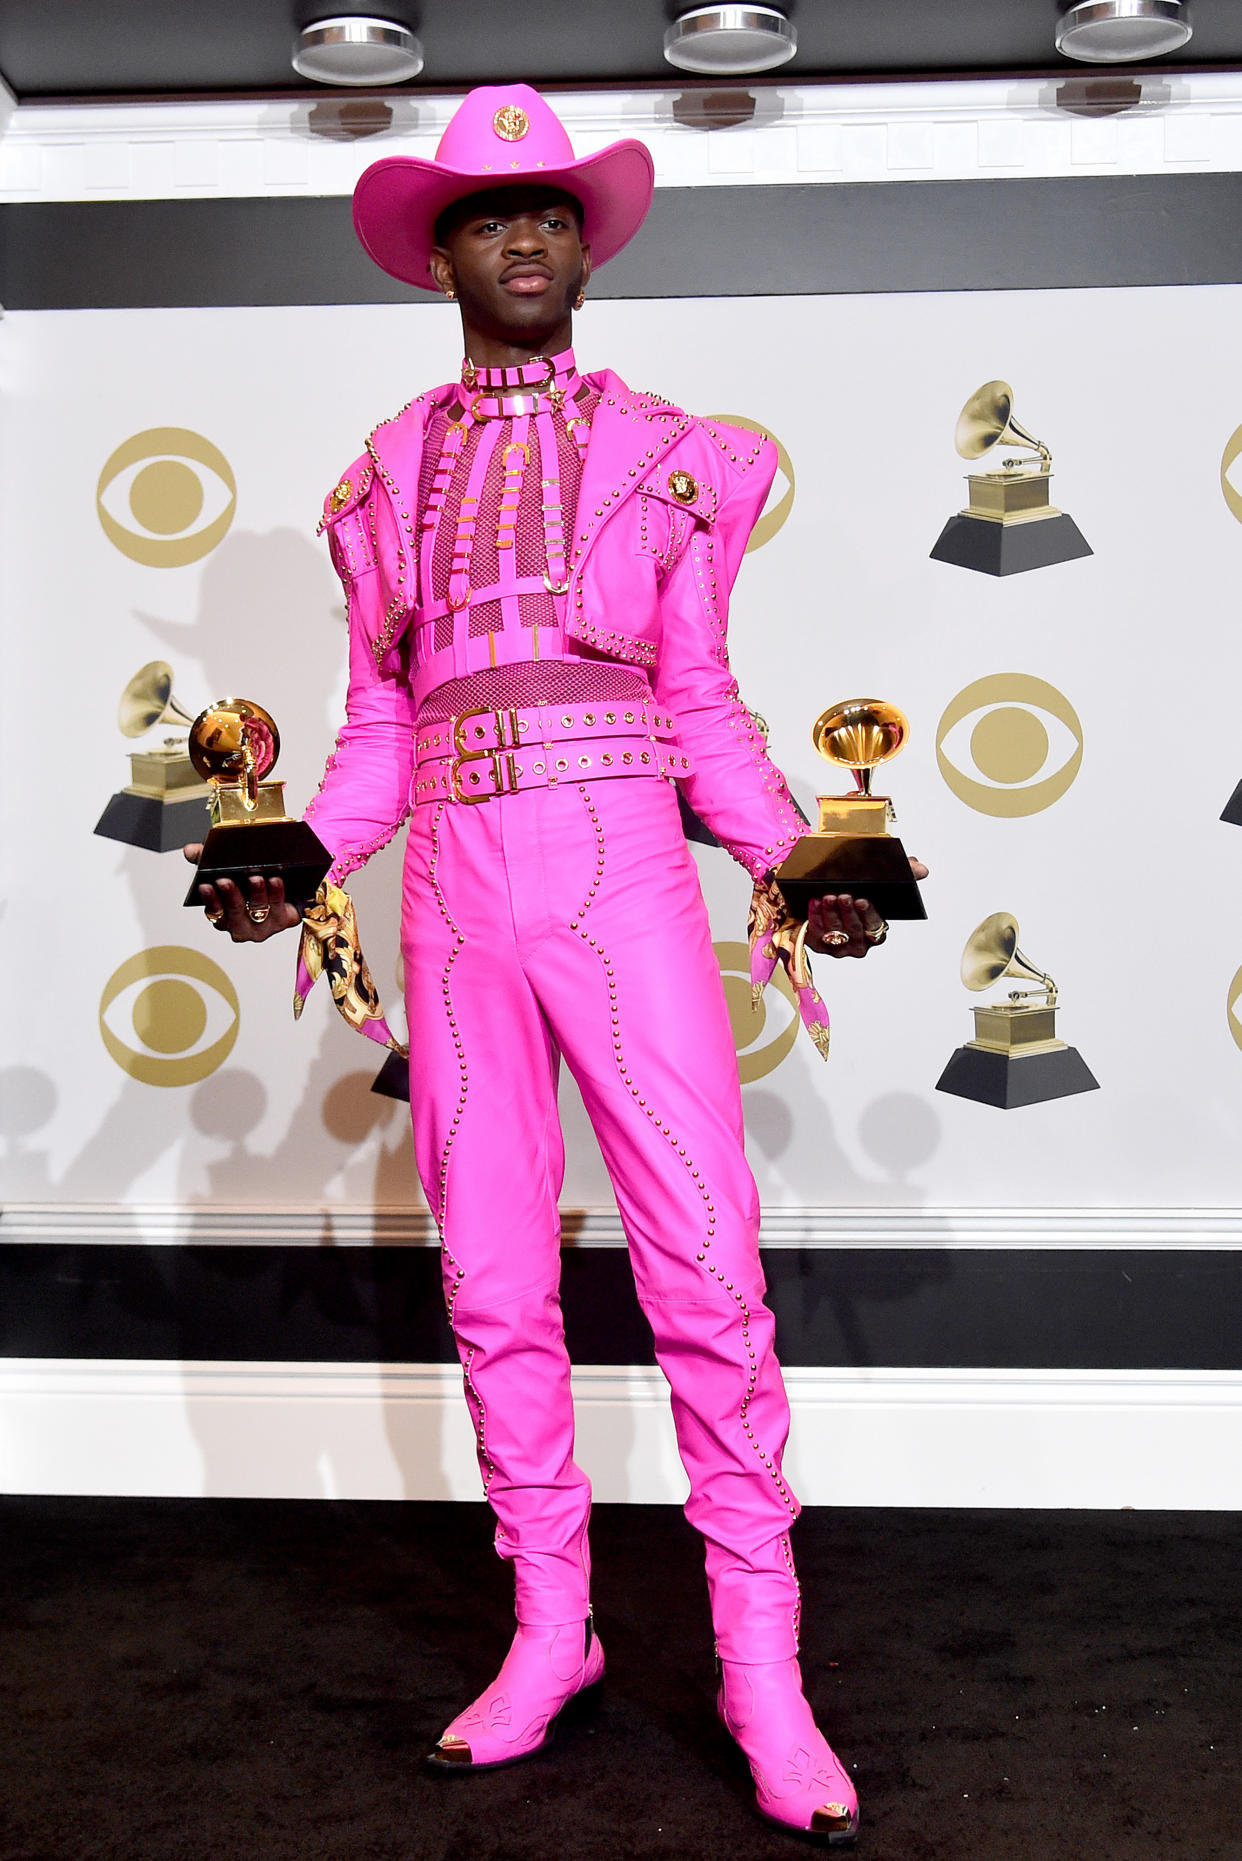 Lil Nas X at the 2020 Grammy Awards in a pink look by Versace. - Credit: Getty Images for The Recording A